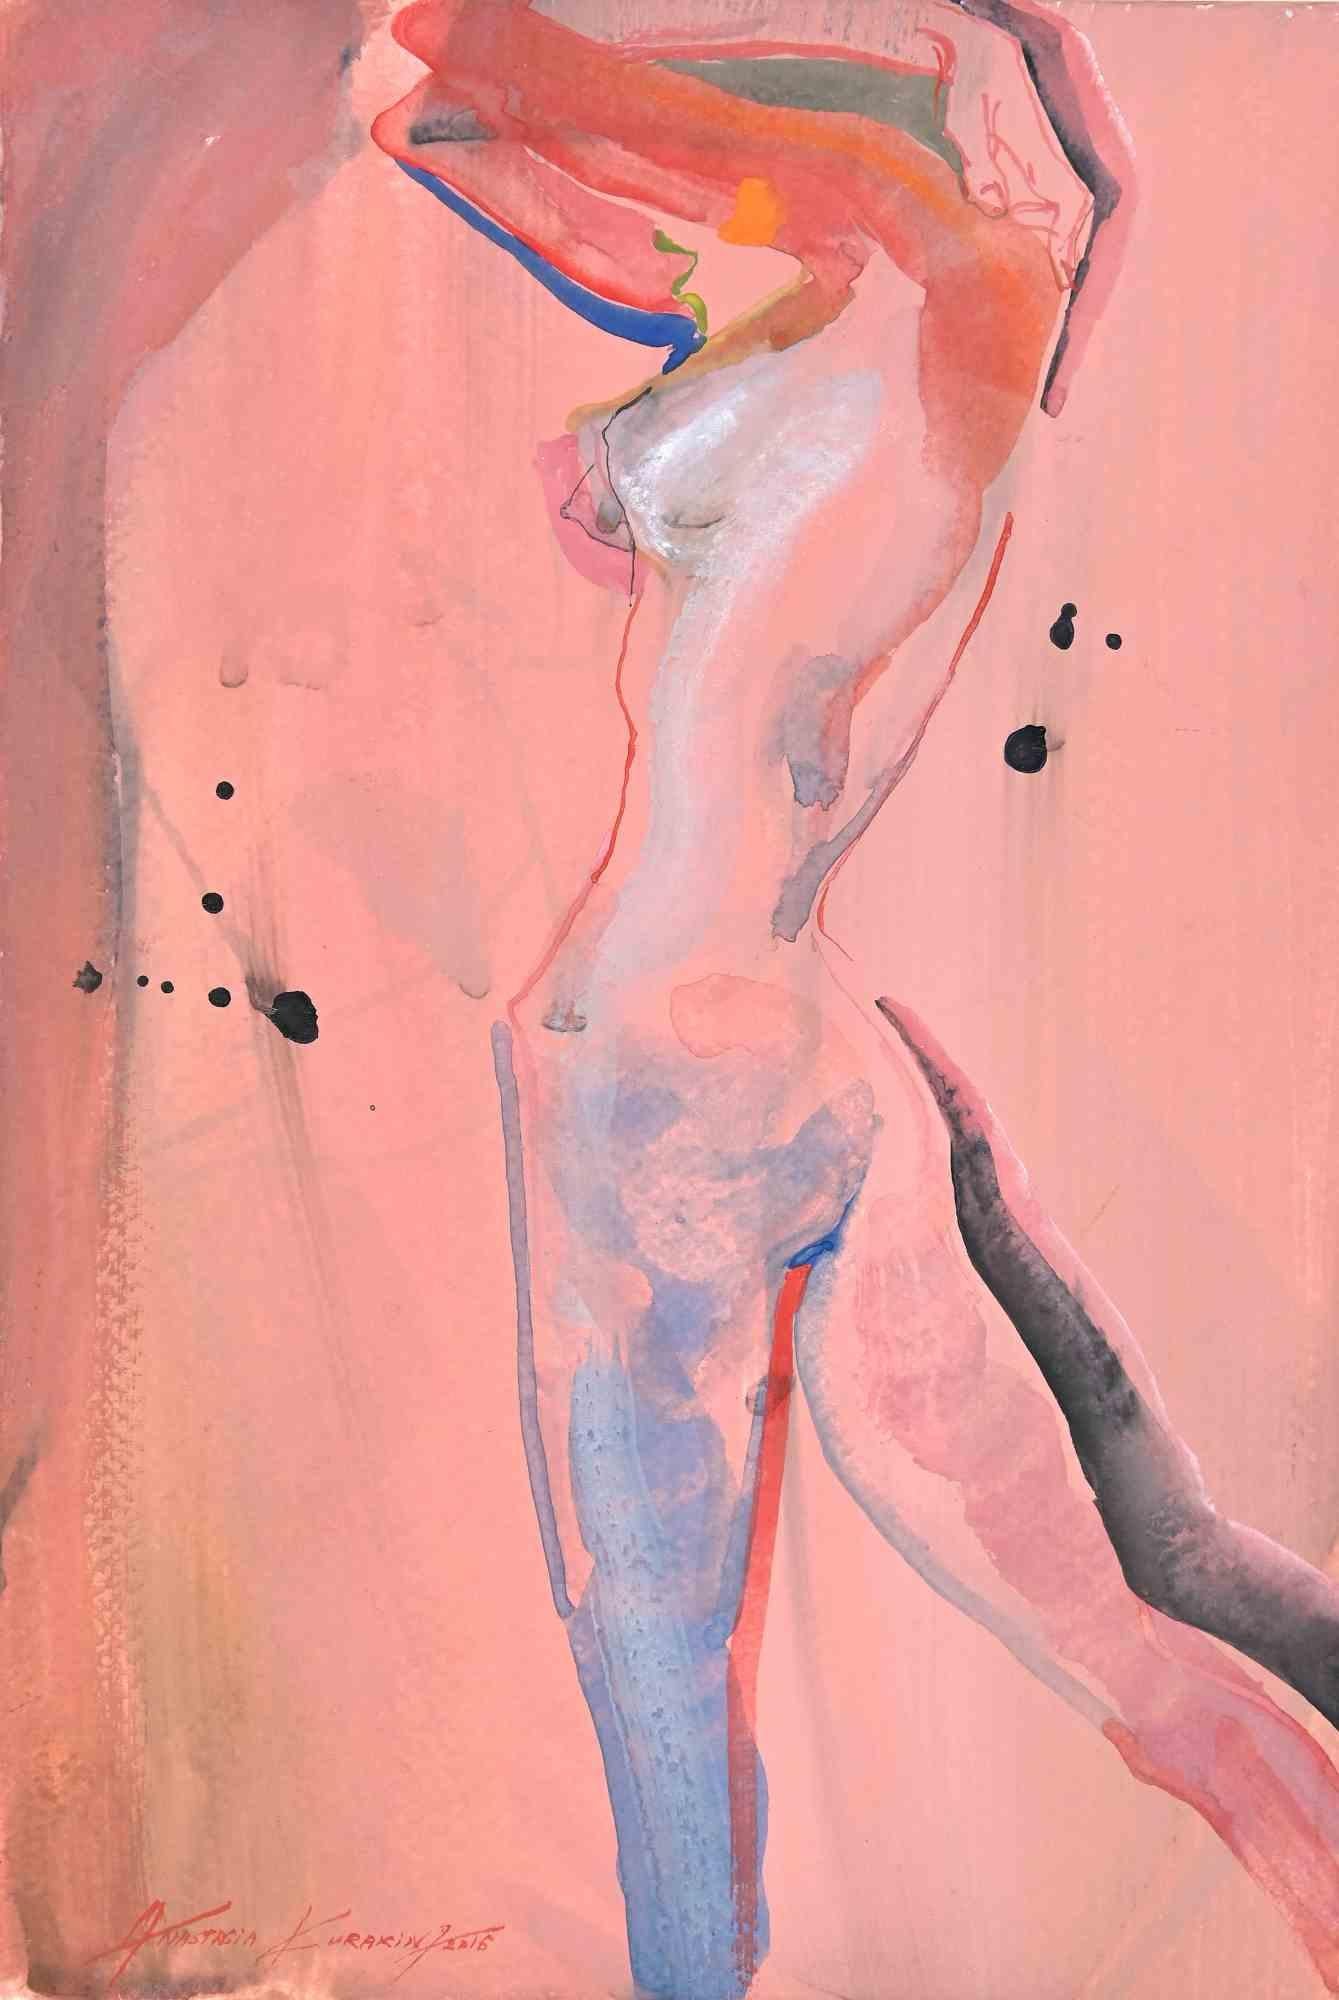 Nude is an original watercolor realized by Anastasia Kurakina in March 2015.

The little artwork is in good condition and with vivid colors.

Hand signed by the artist on the lower left corner.

Anastasia Kurakina was born in Moscow in 1987. She